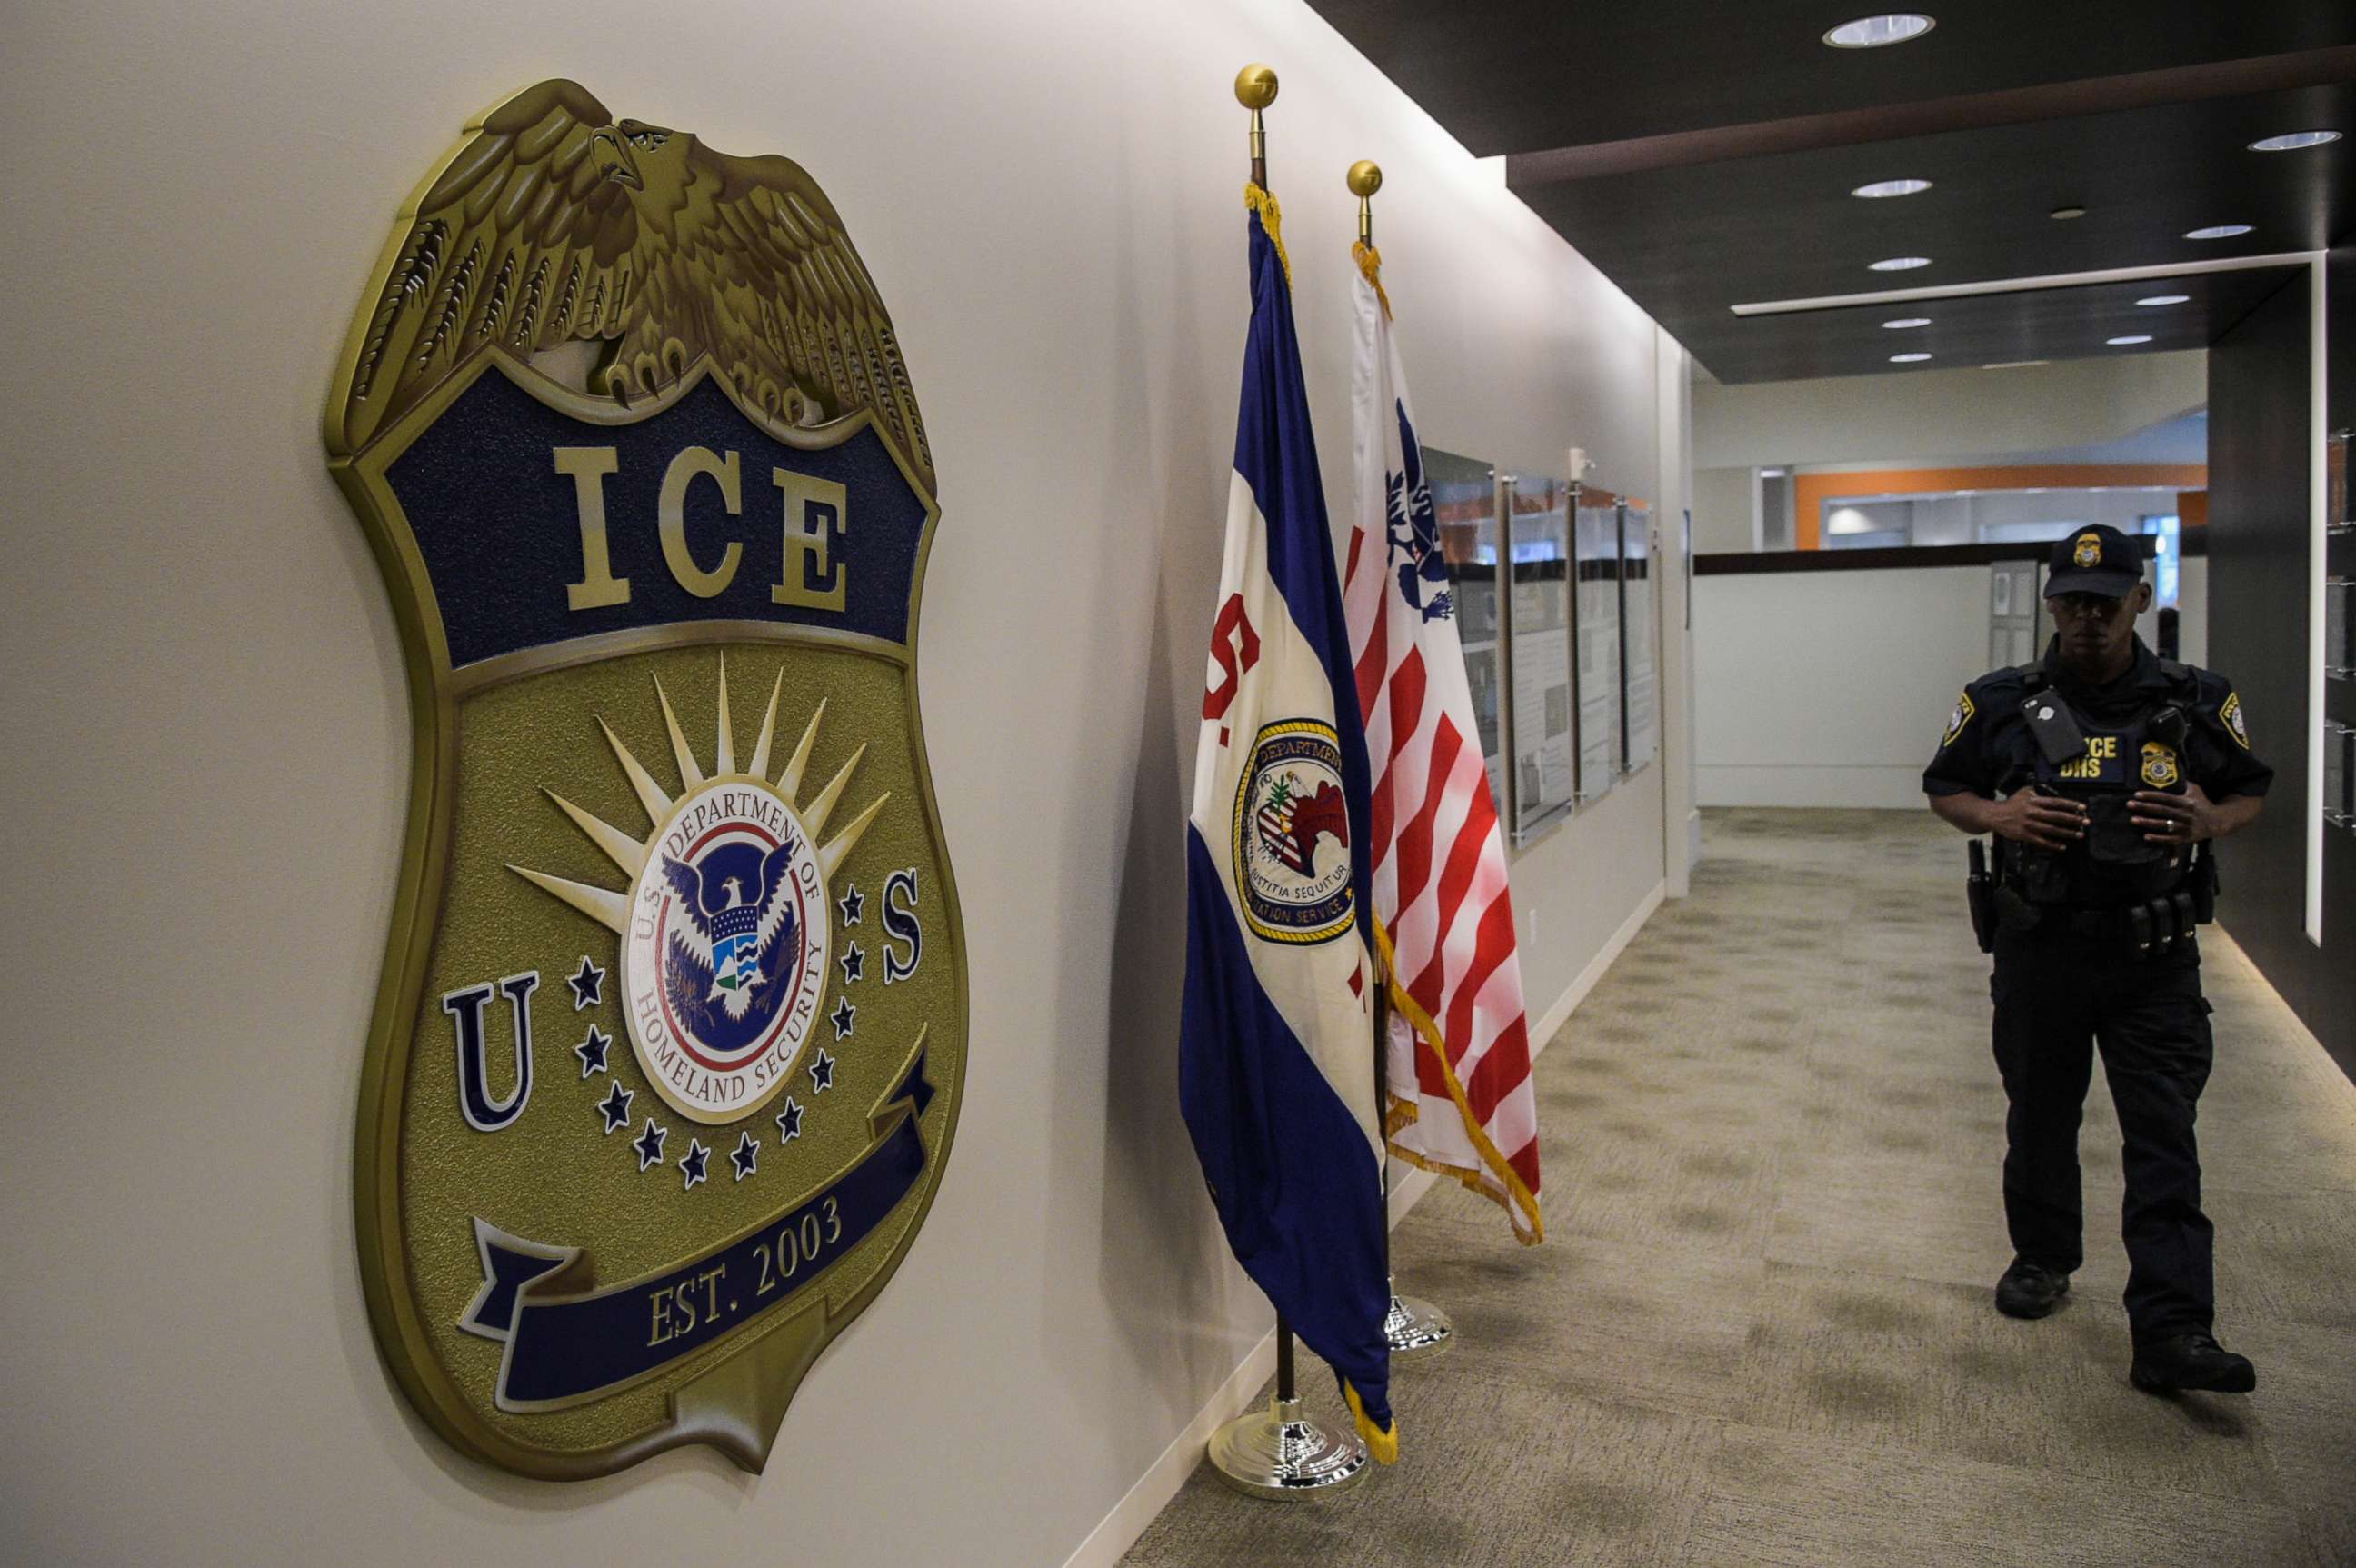 PHOTO: A law enforcement officer walks past ICE logo ahead of a press conference at the U.S. Immigration and Customs Enforcement headquarters, May 11, 2017, in Washington, D.C.